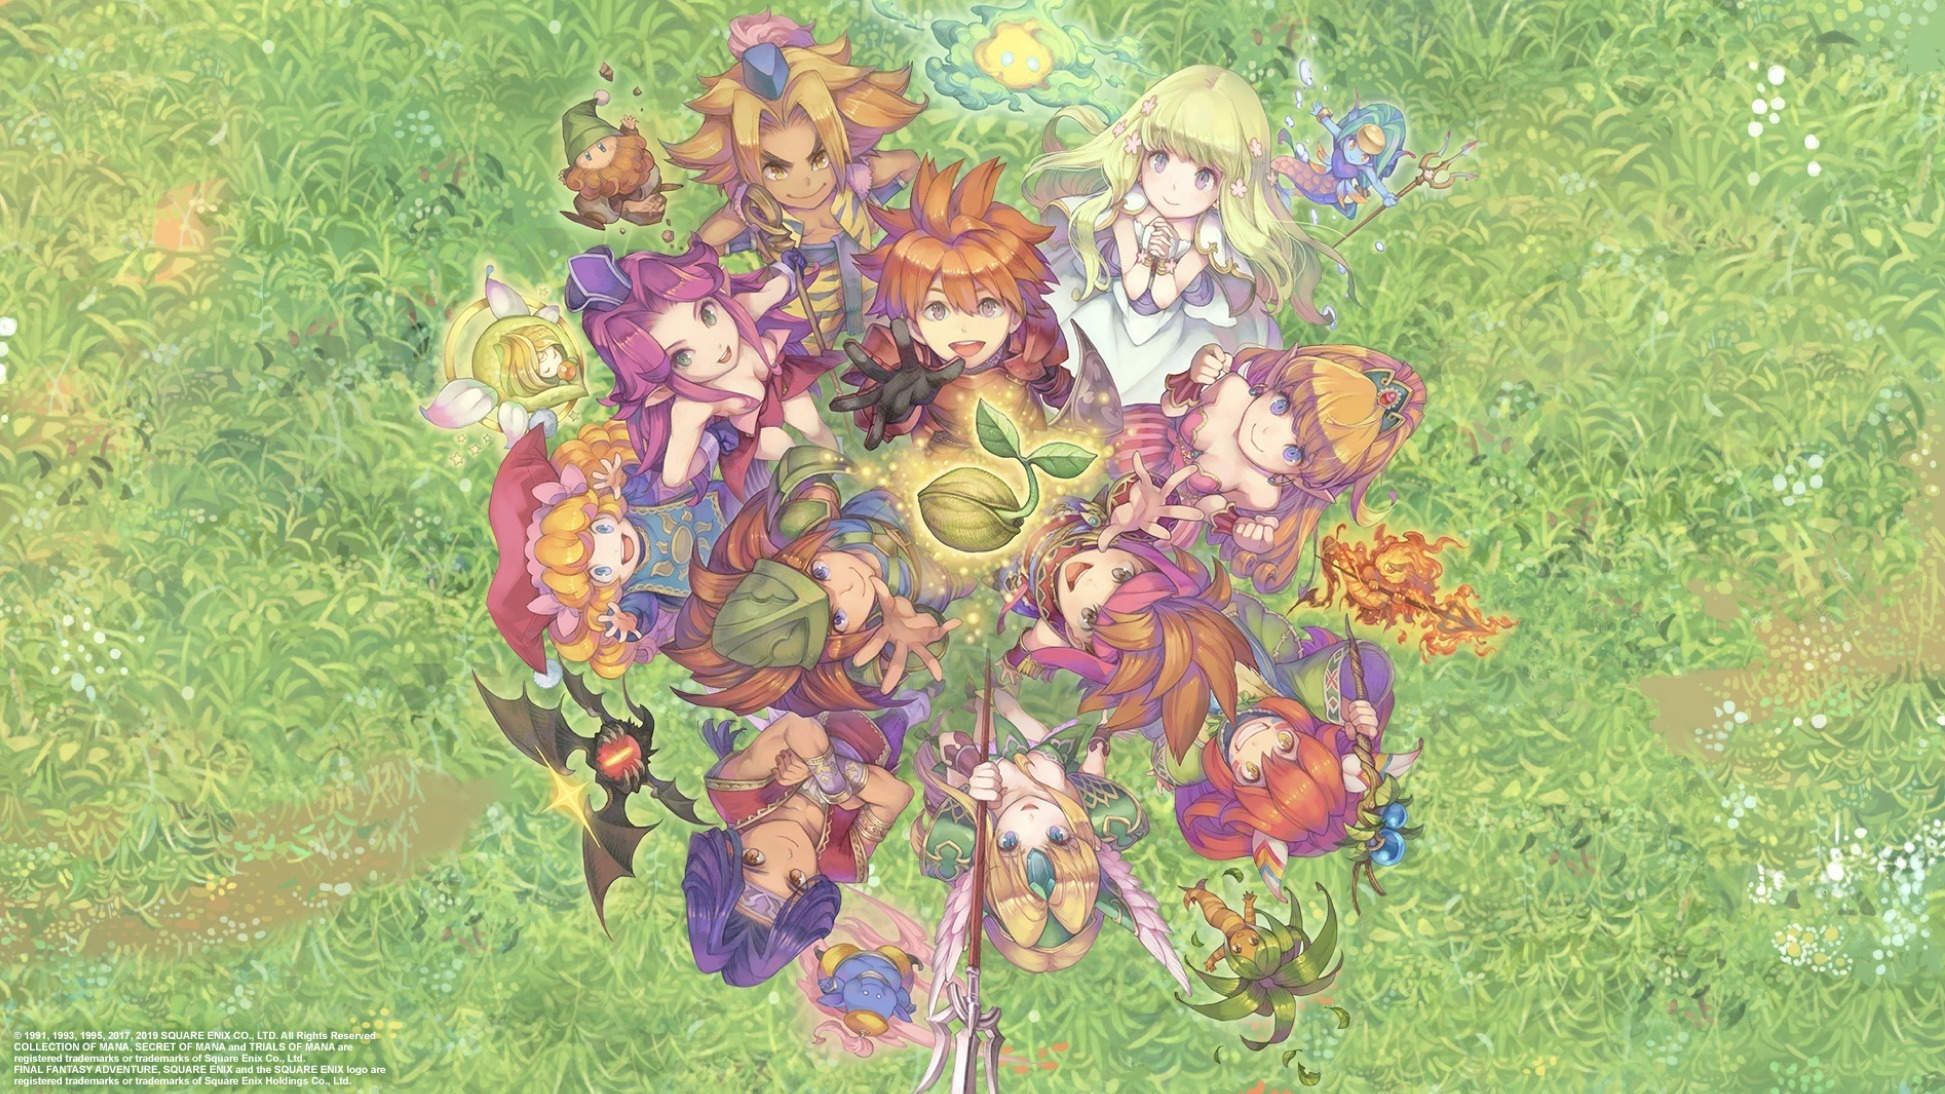 What's so good about Collection of Mana on Nintendo Switch